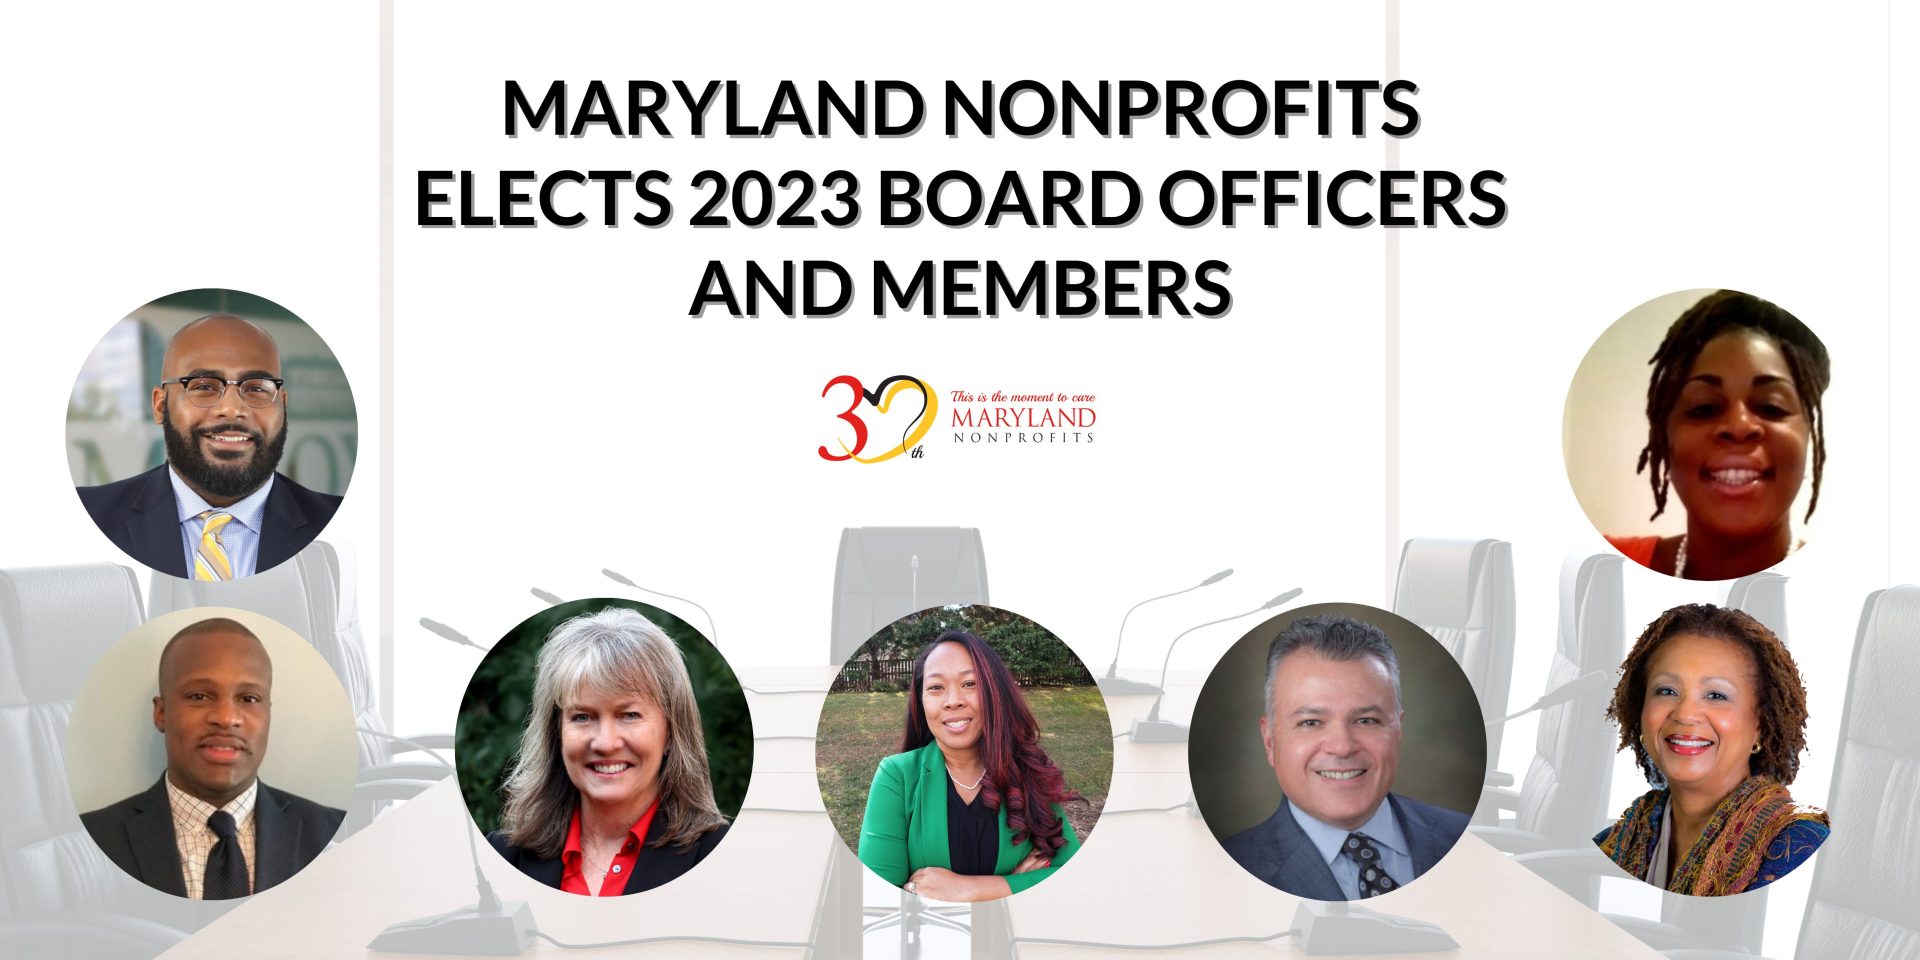 Maryland nonprofits elects 2023 board officers and members Blog Featured Image